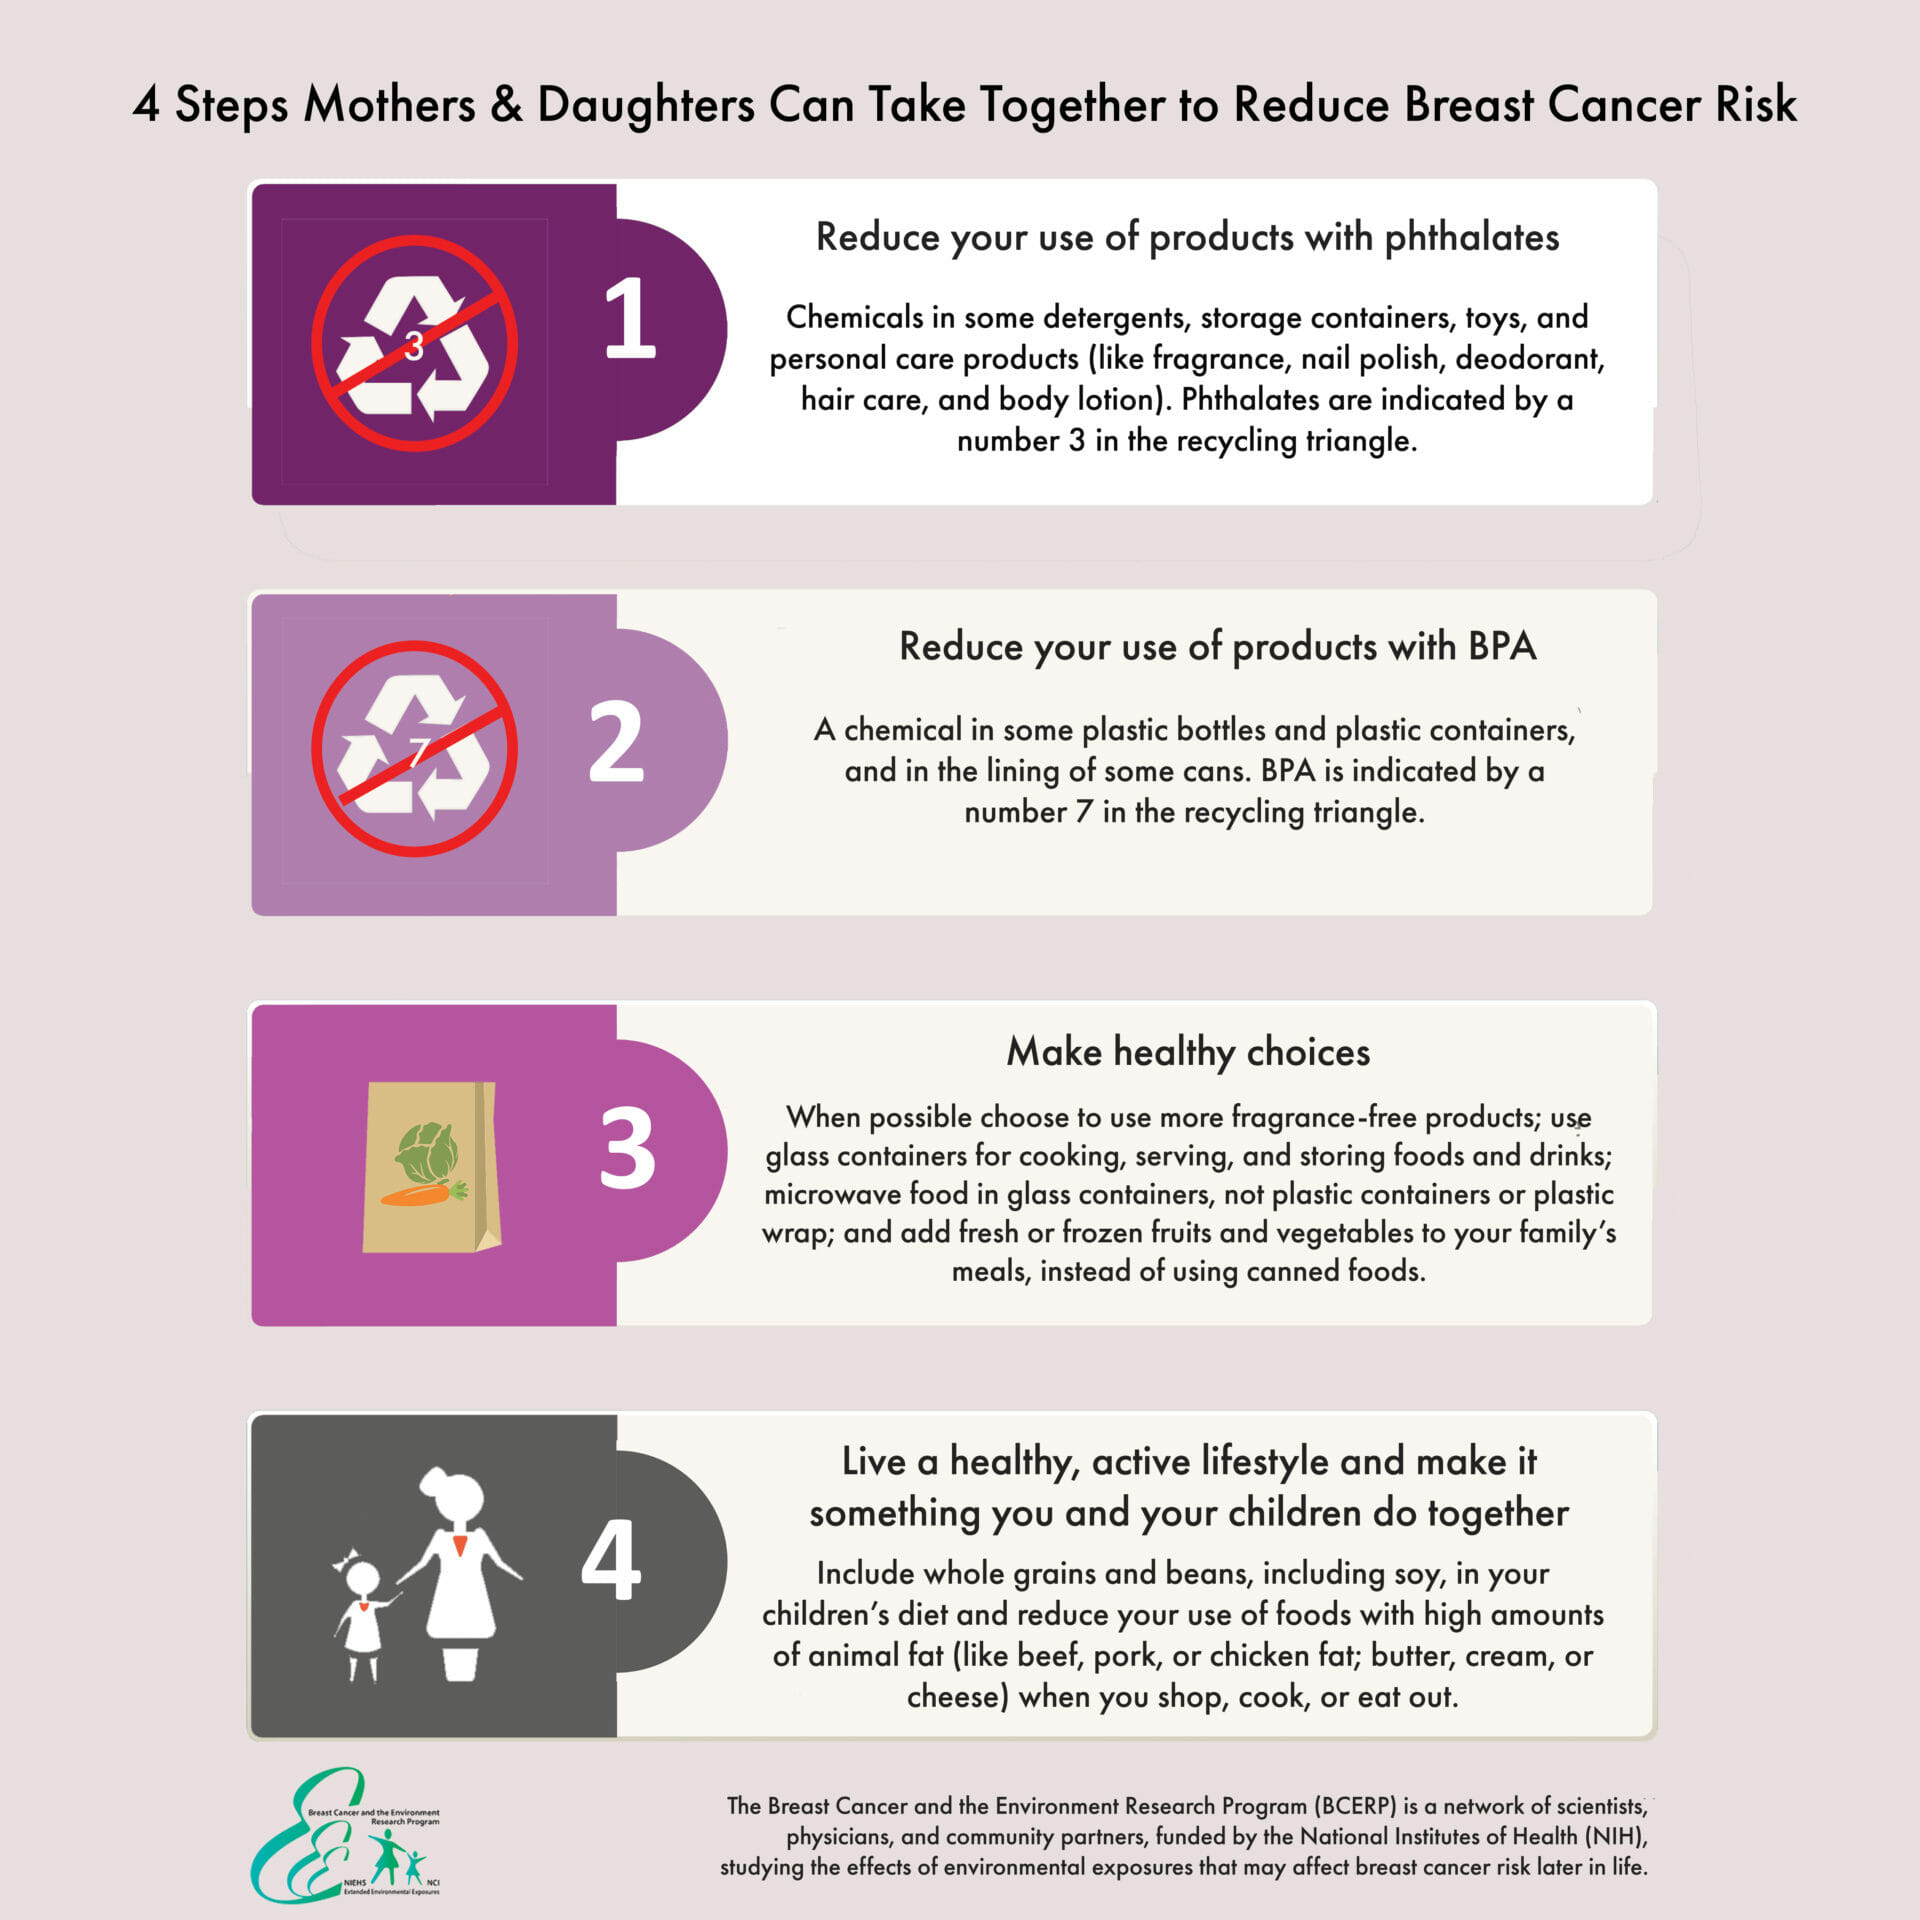 Four Steps Mothers and Daughters Can Take To Reduce Breast Cancer Risk 